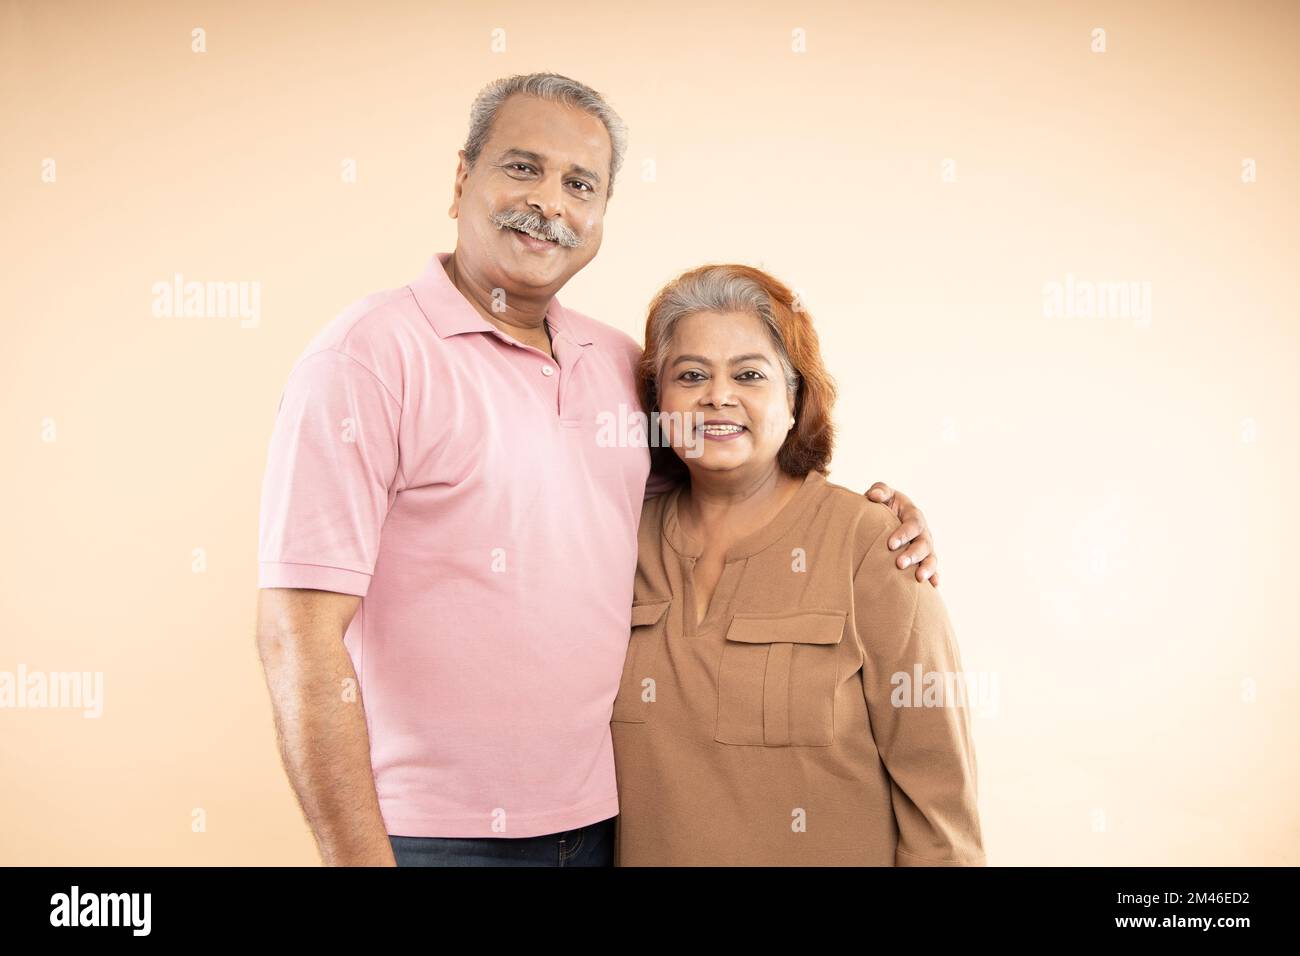 Portrait of Happy indian senior couple standing together over beige background. Old Asian man and woman smiling. Stock Photo